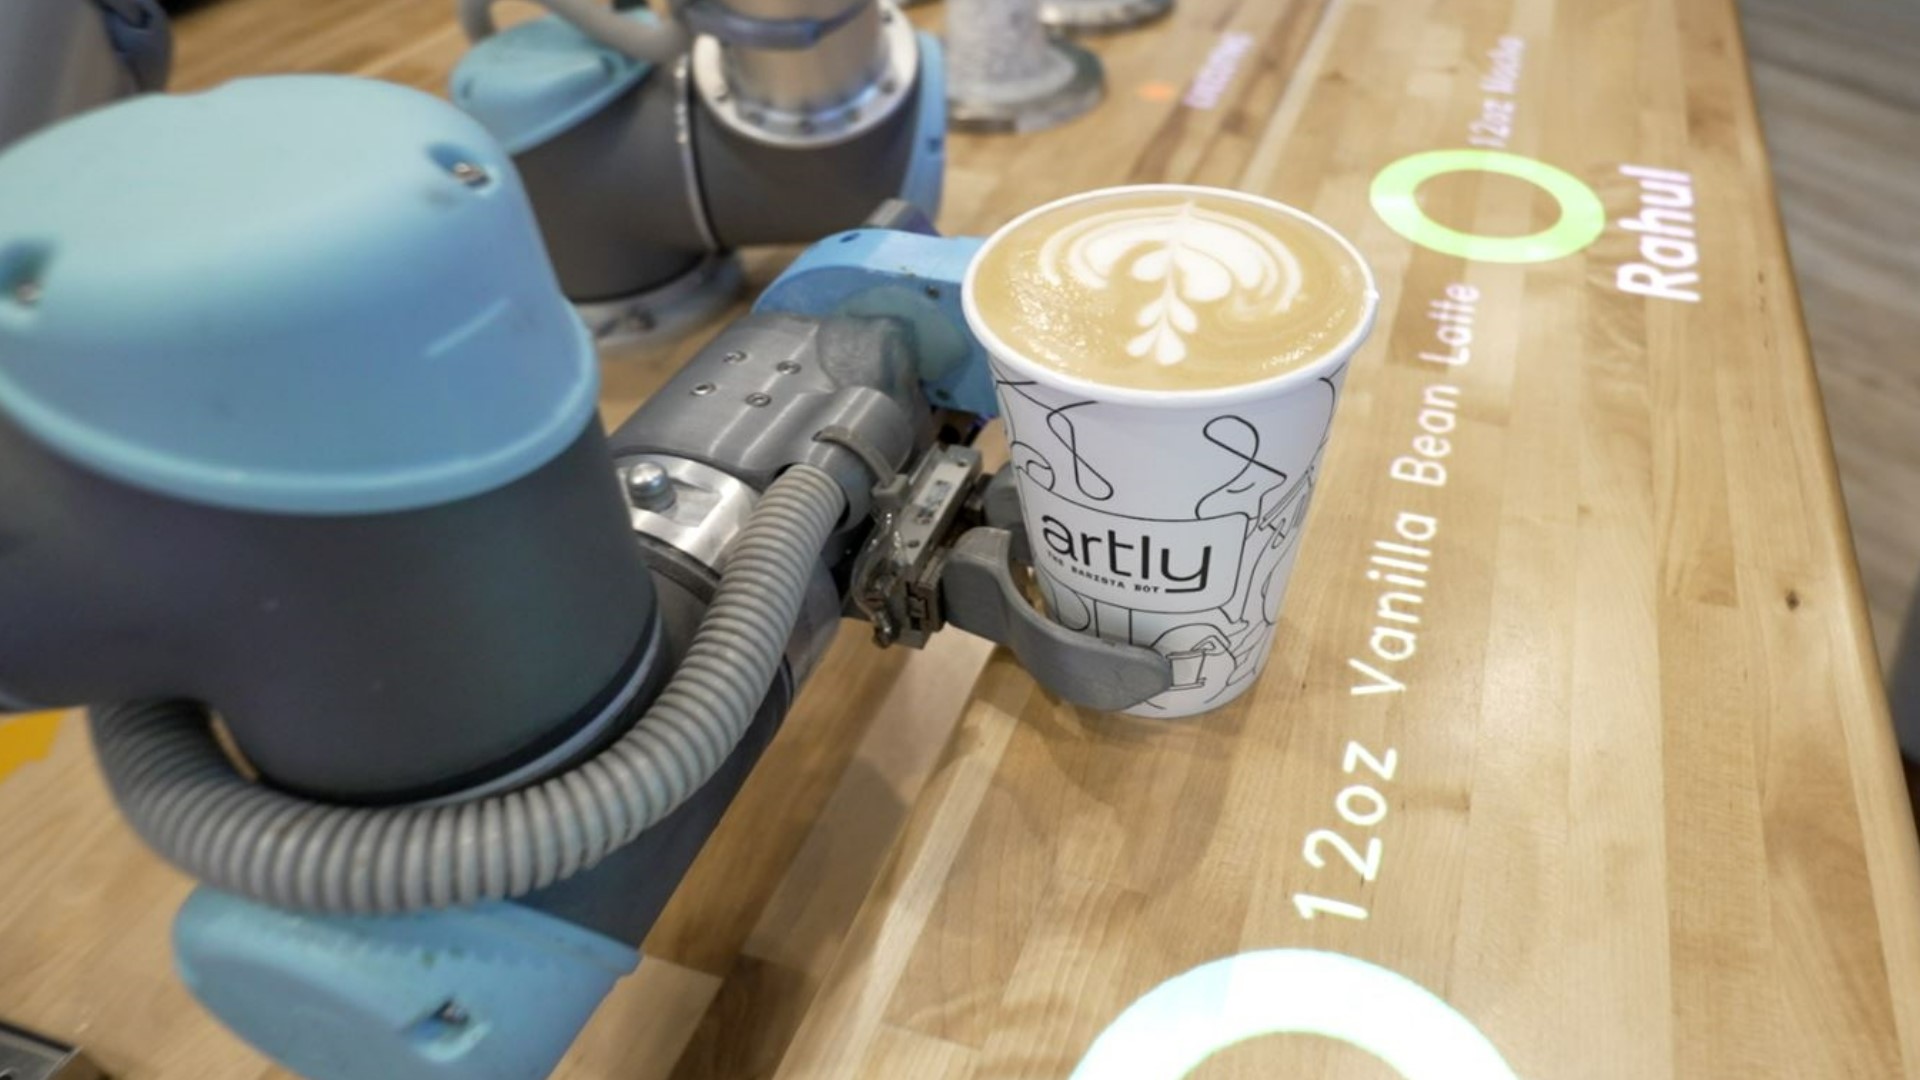 Artly Coffee blends classic espresso drinks with artificial intelligence to create a unique coffee bar experience. #k5evening